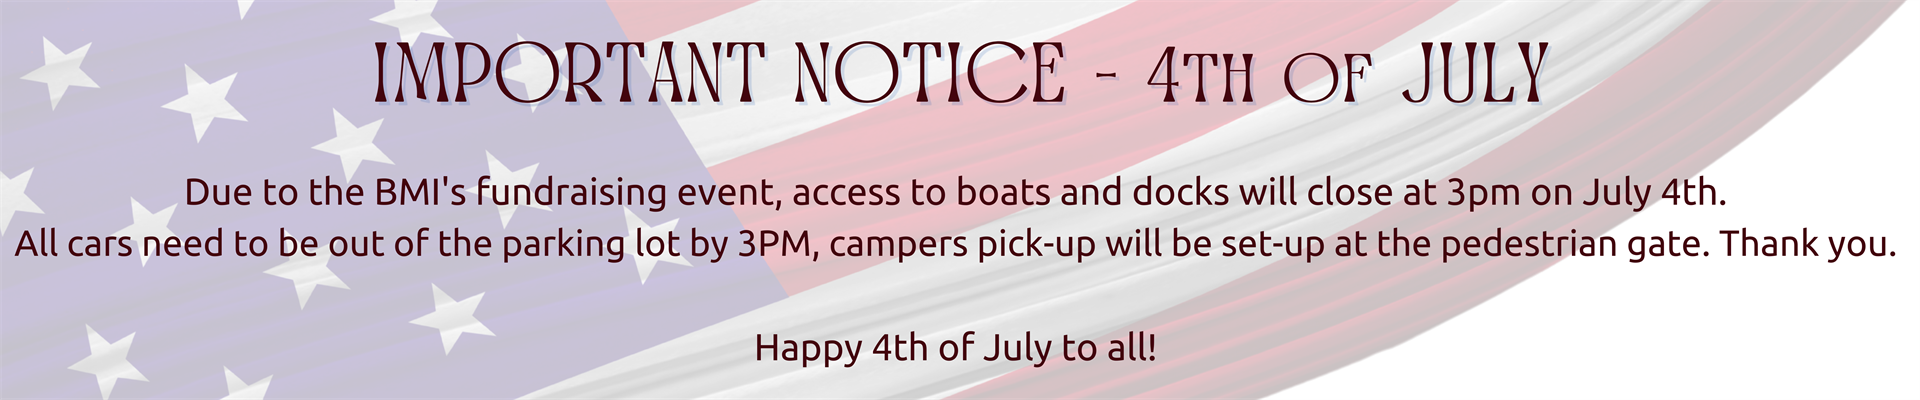 Important Notice - 4th of July - Due to the BMI's fundraising event, access to boats and docks will close at 3pm on July 4th.  All cars need to be out of the parking lot by 3PM, campers pick-up will be set-up at the pedestrian gate. Thank you.   Happy 4th of July to all!